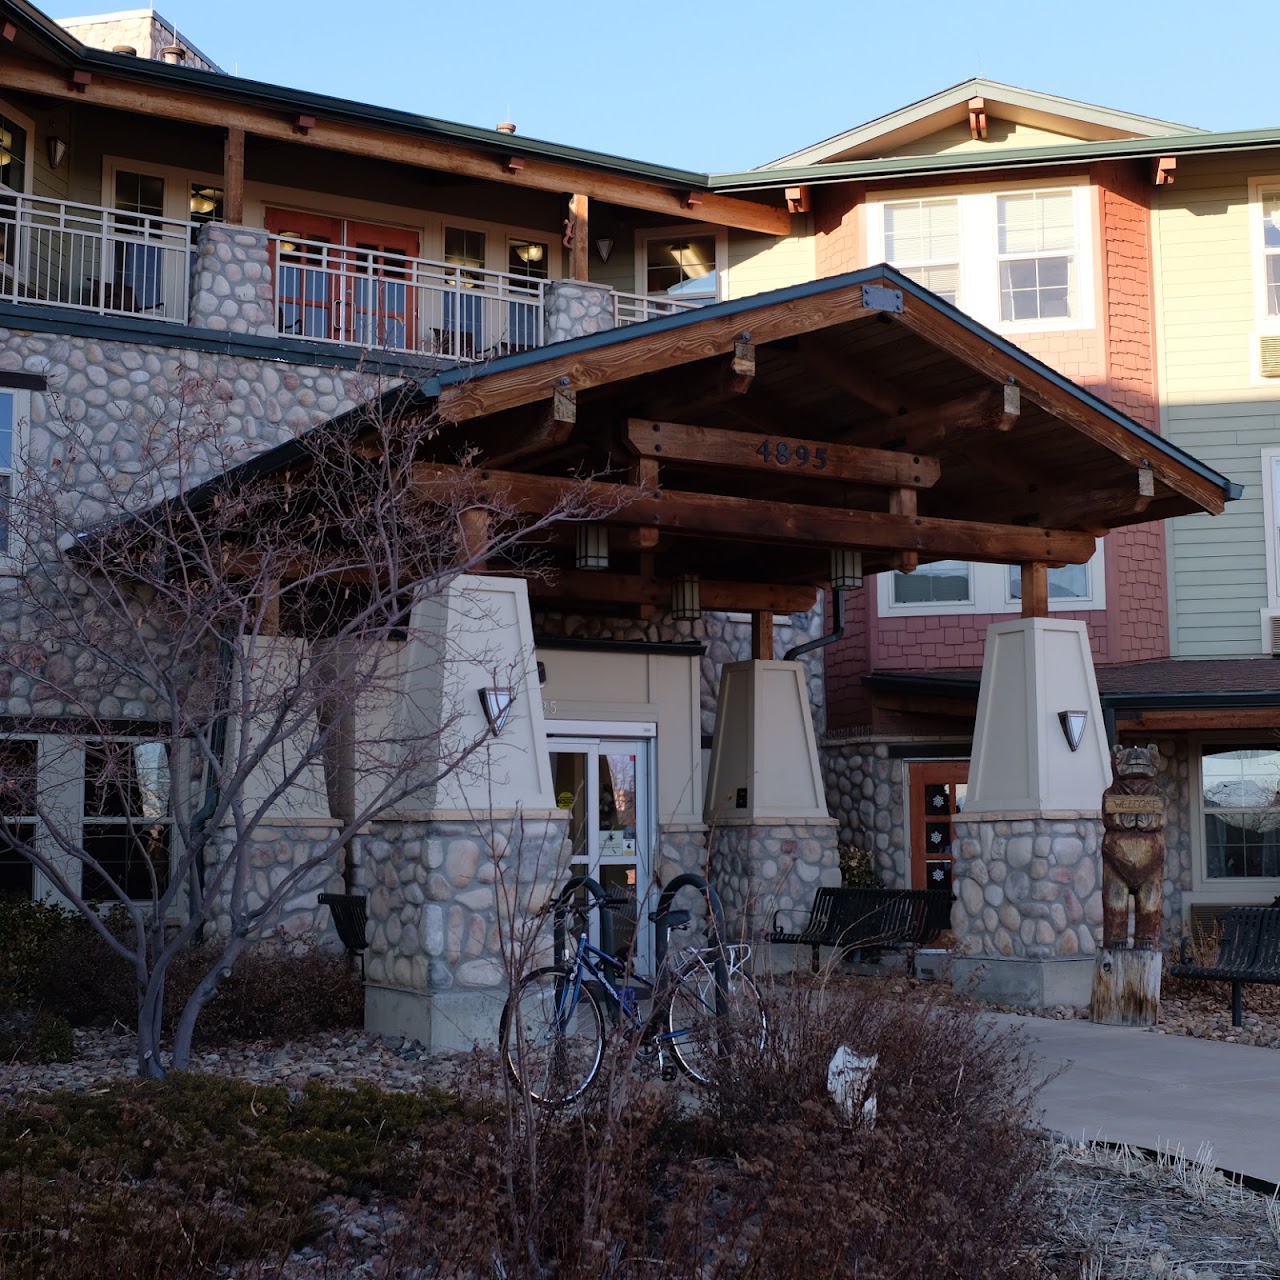 Photo of ROCK CREST. Affordable housing located at 4905 LUCERNE AVE LOVELAND, CO 80538